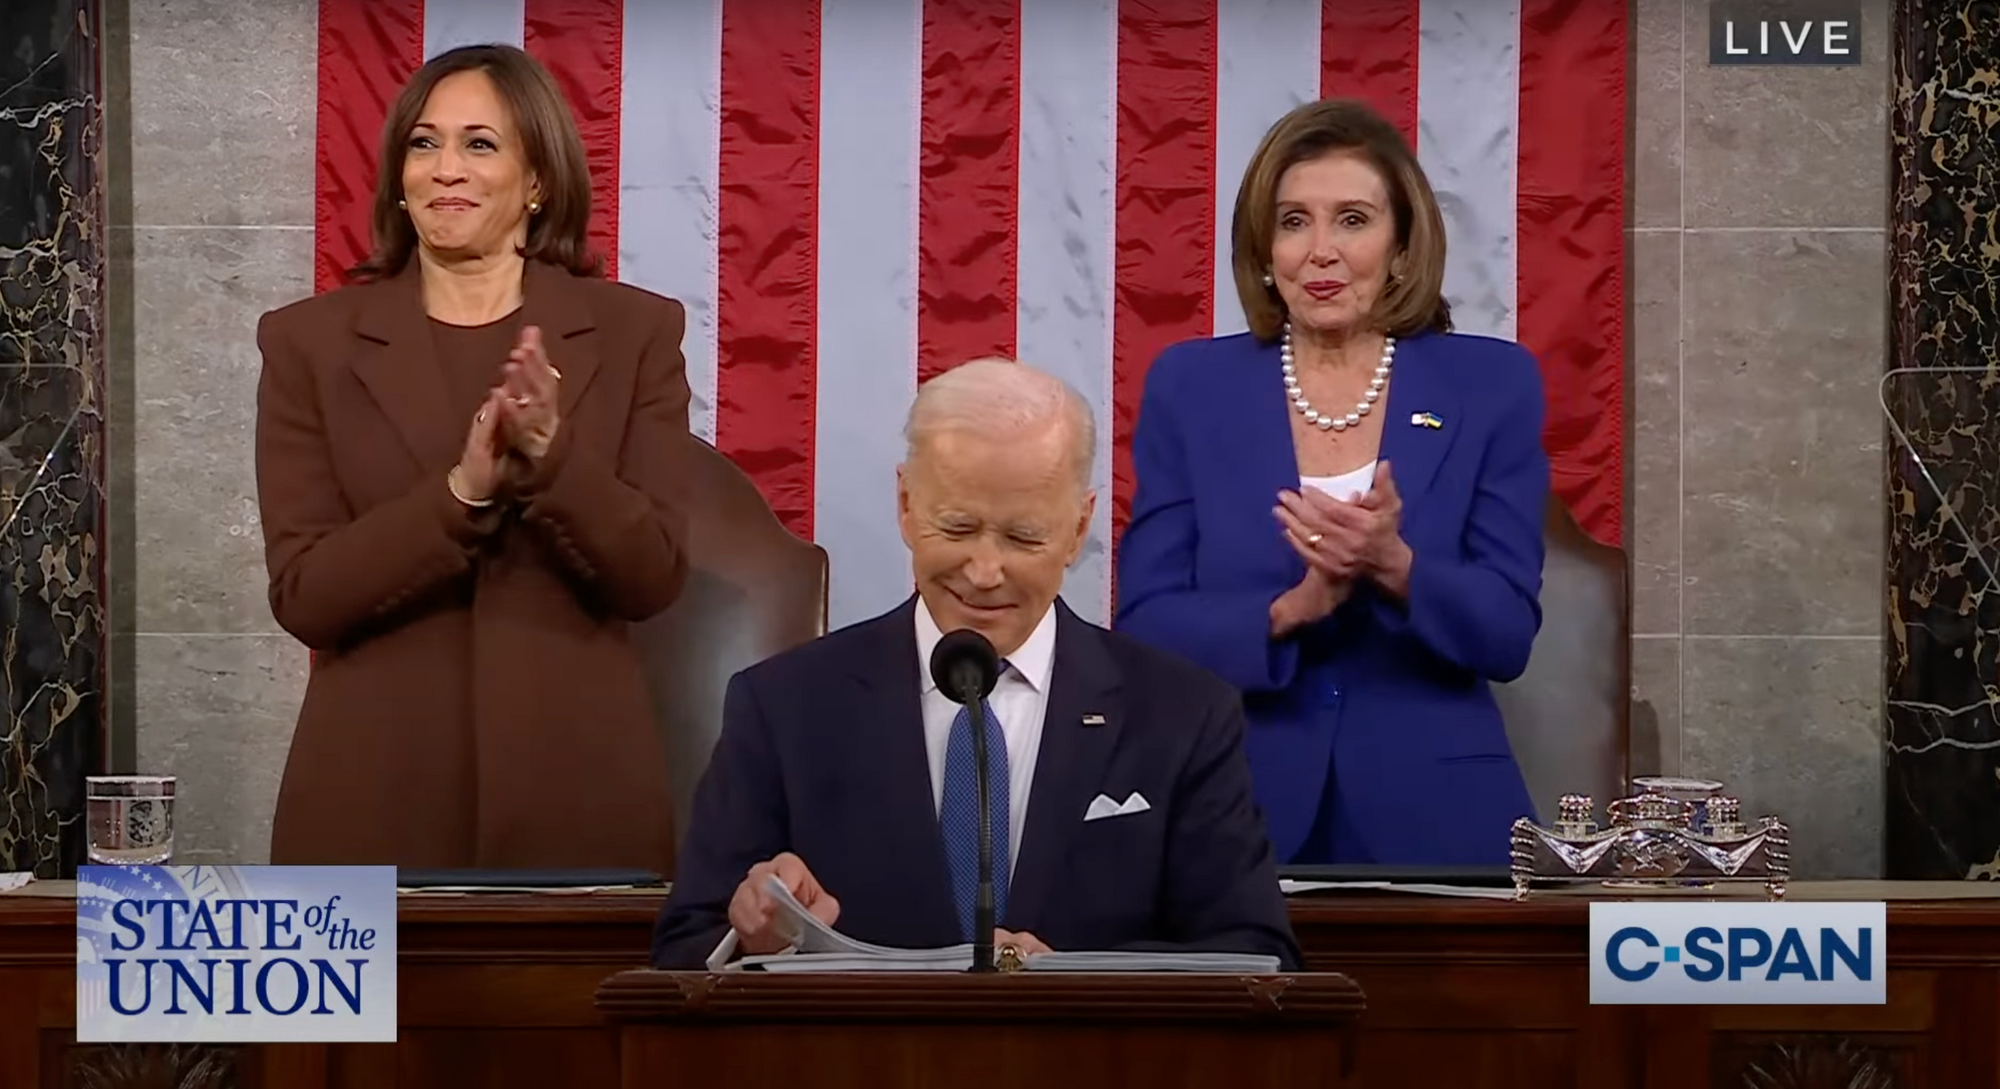 A screenshot from Biden's State of the Union address. Source: C-SPAN